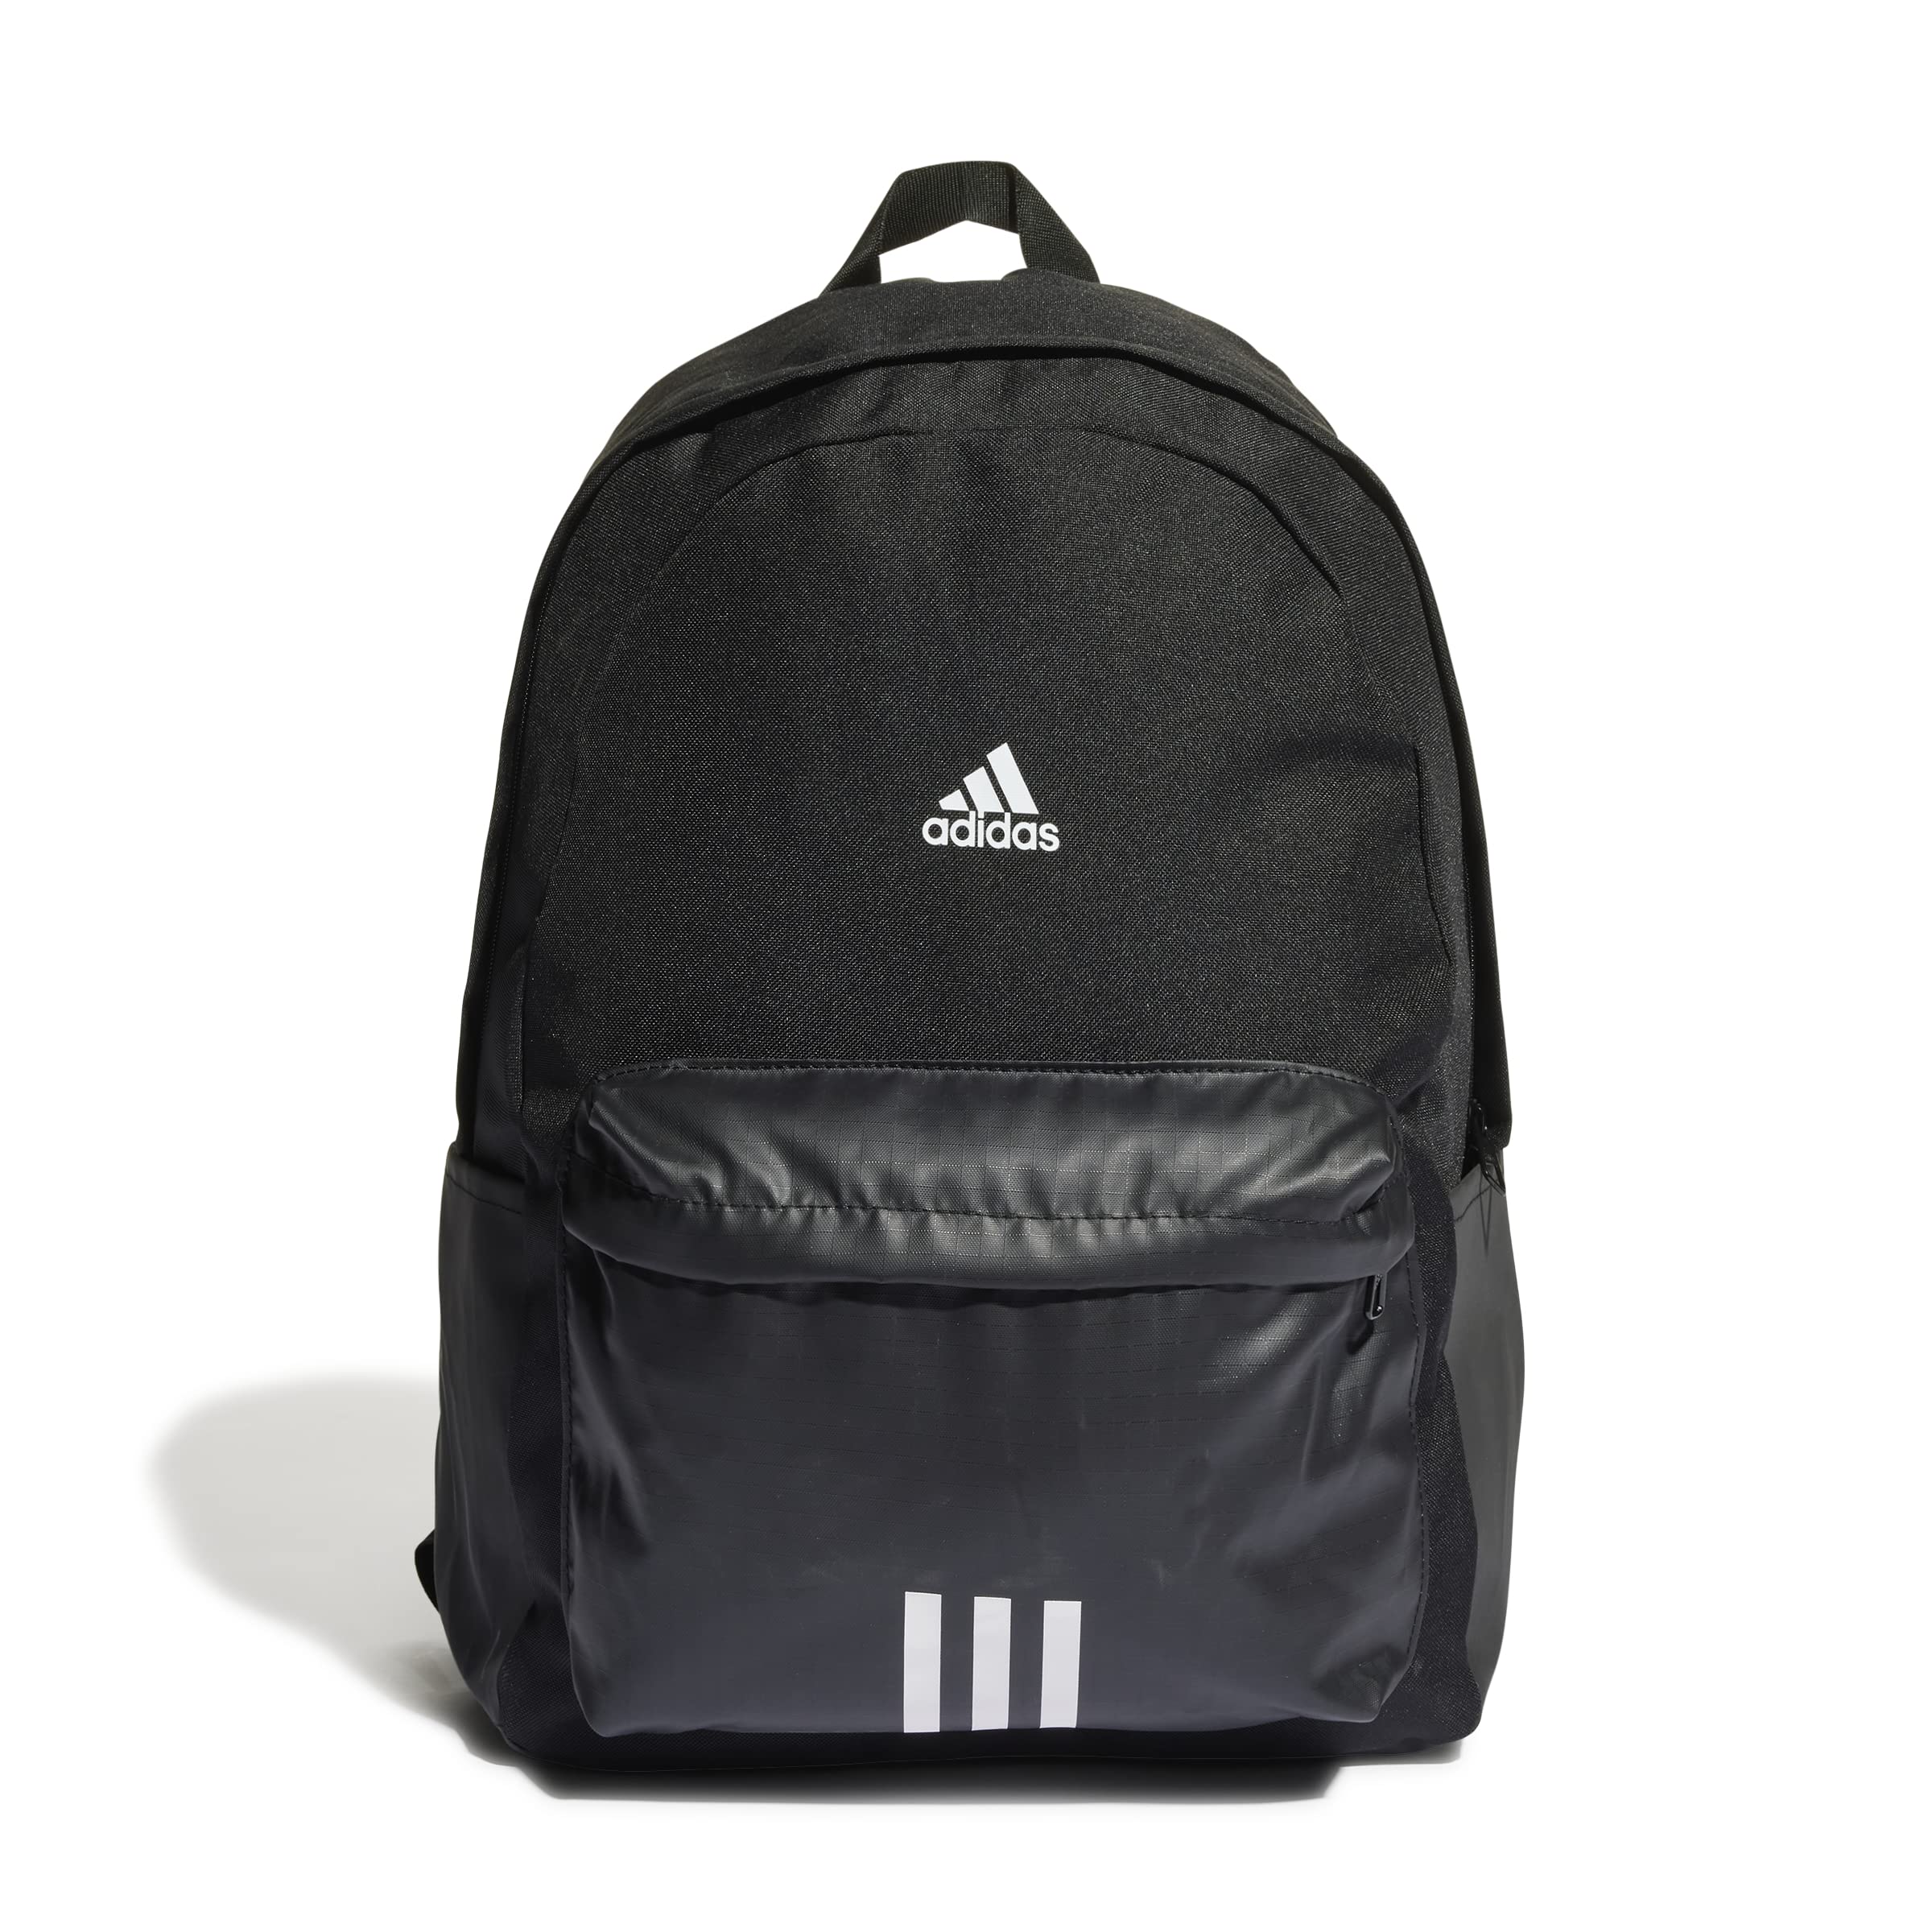 adidas Unisex Clsc Bos 3s Bp Backpack